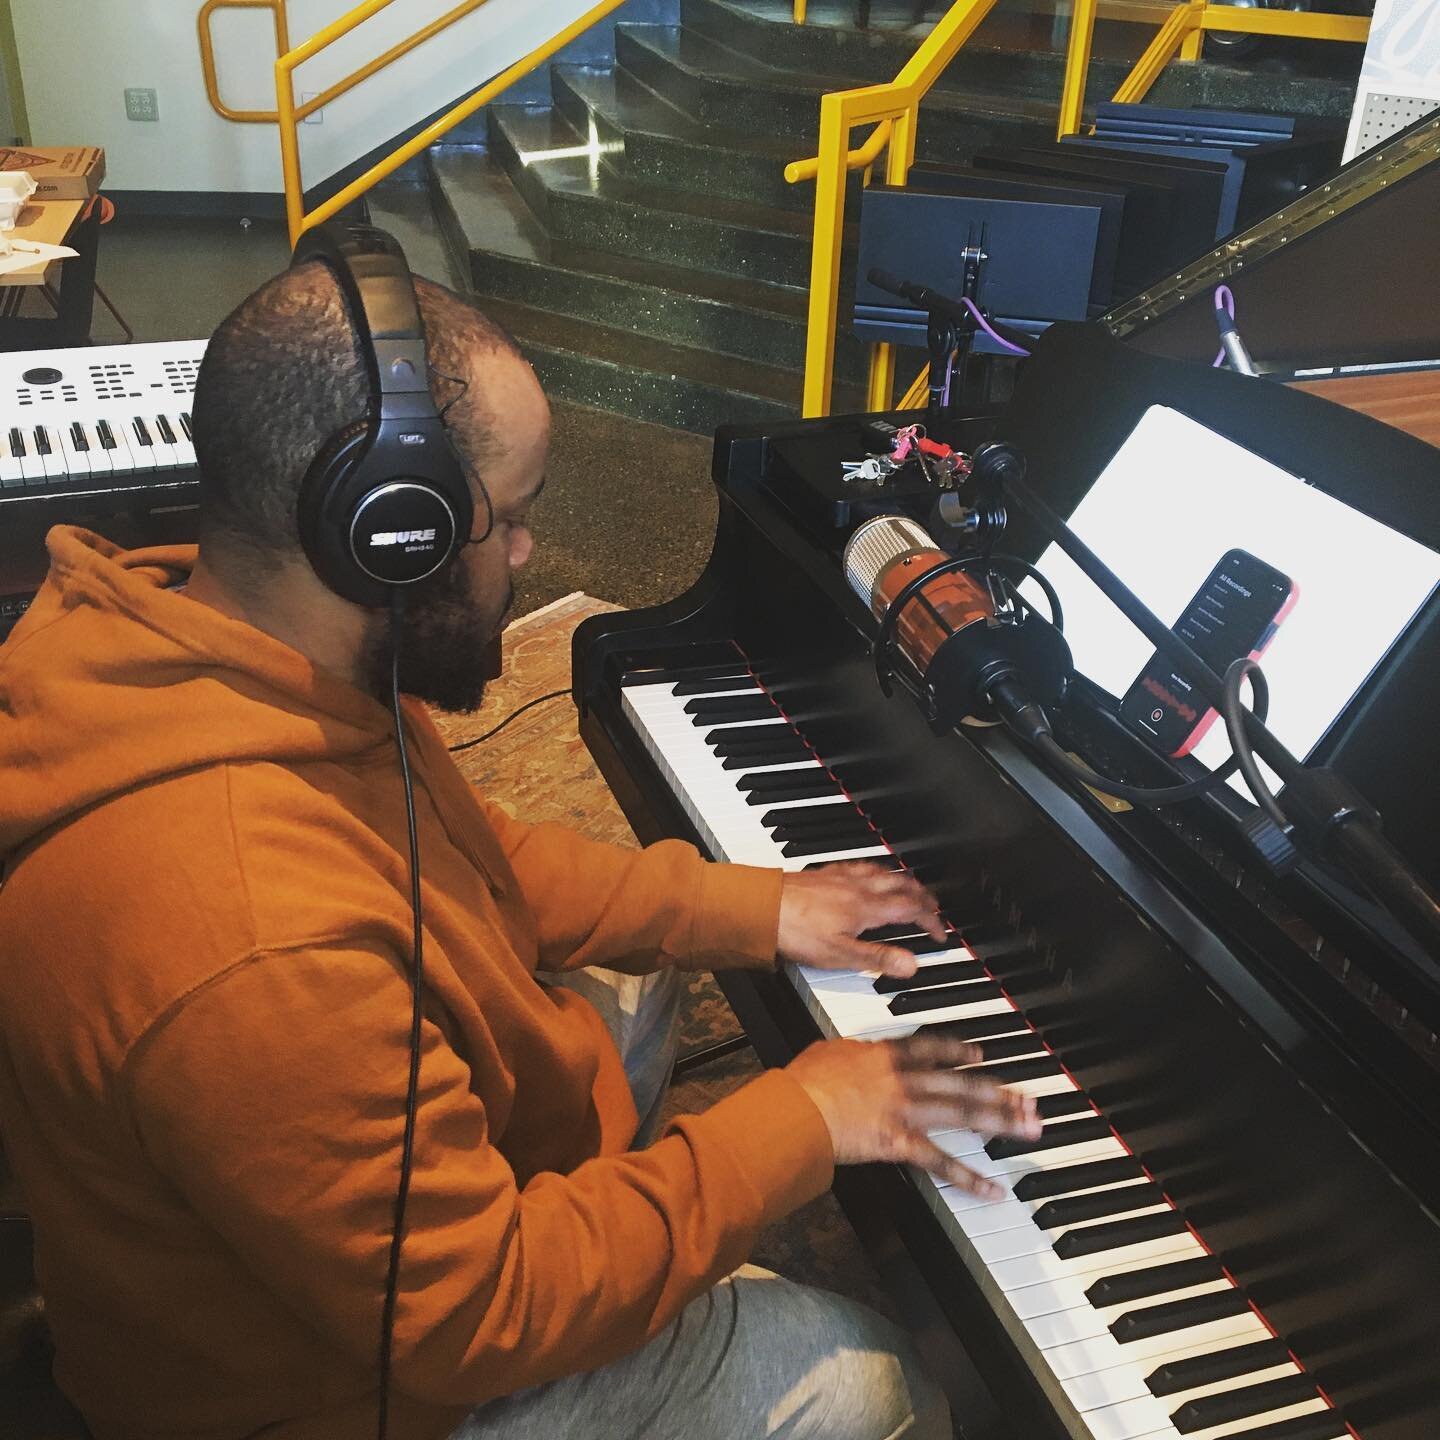 Piano overdubs yesterday at @therecordcotrc with @i_am_mastadonis , who&rsquo;s always so ahead of the game, he decided to wear an outfit matching the mics. @neumann.berlin TLM 102&rsquo;s inside, Cascade Fatheads outside, and @roswellproaudio Colare